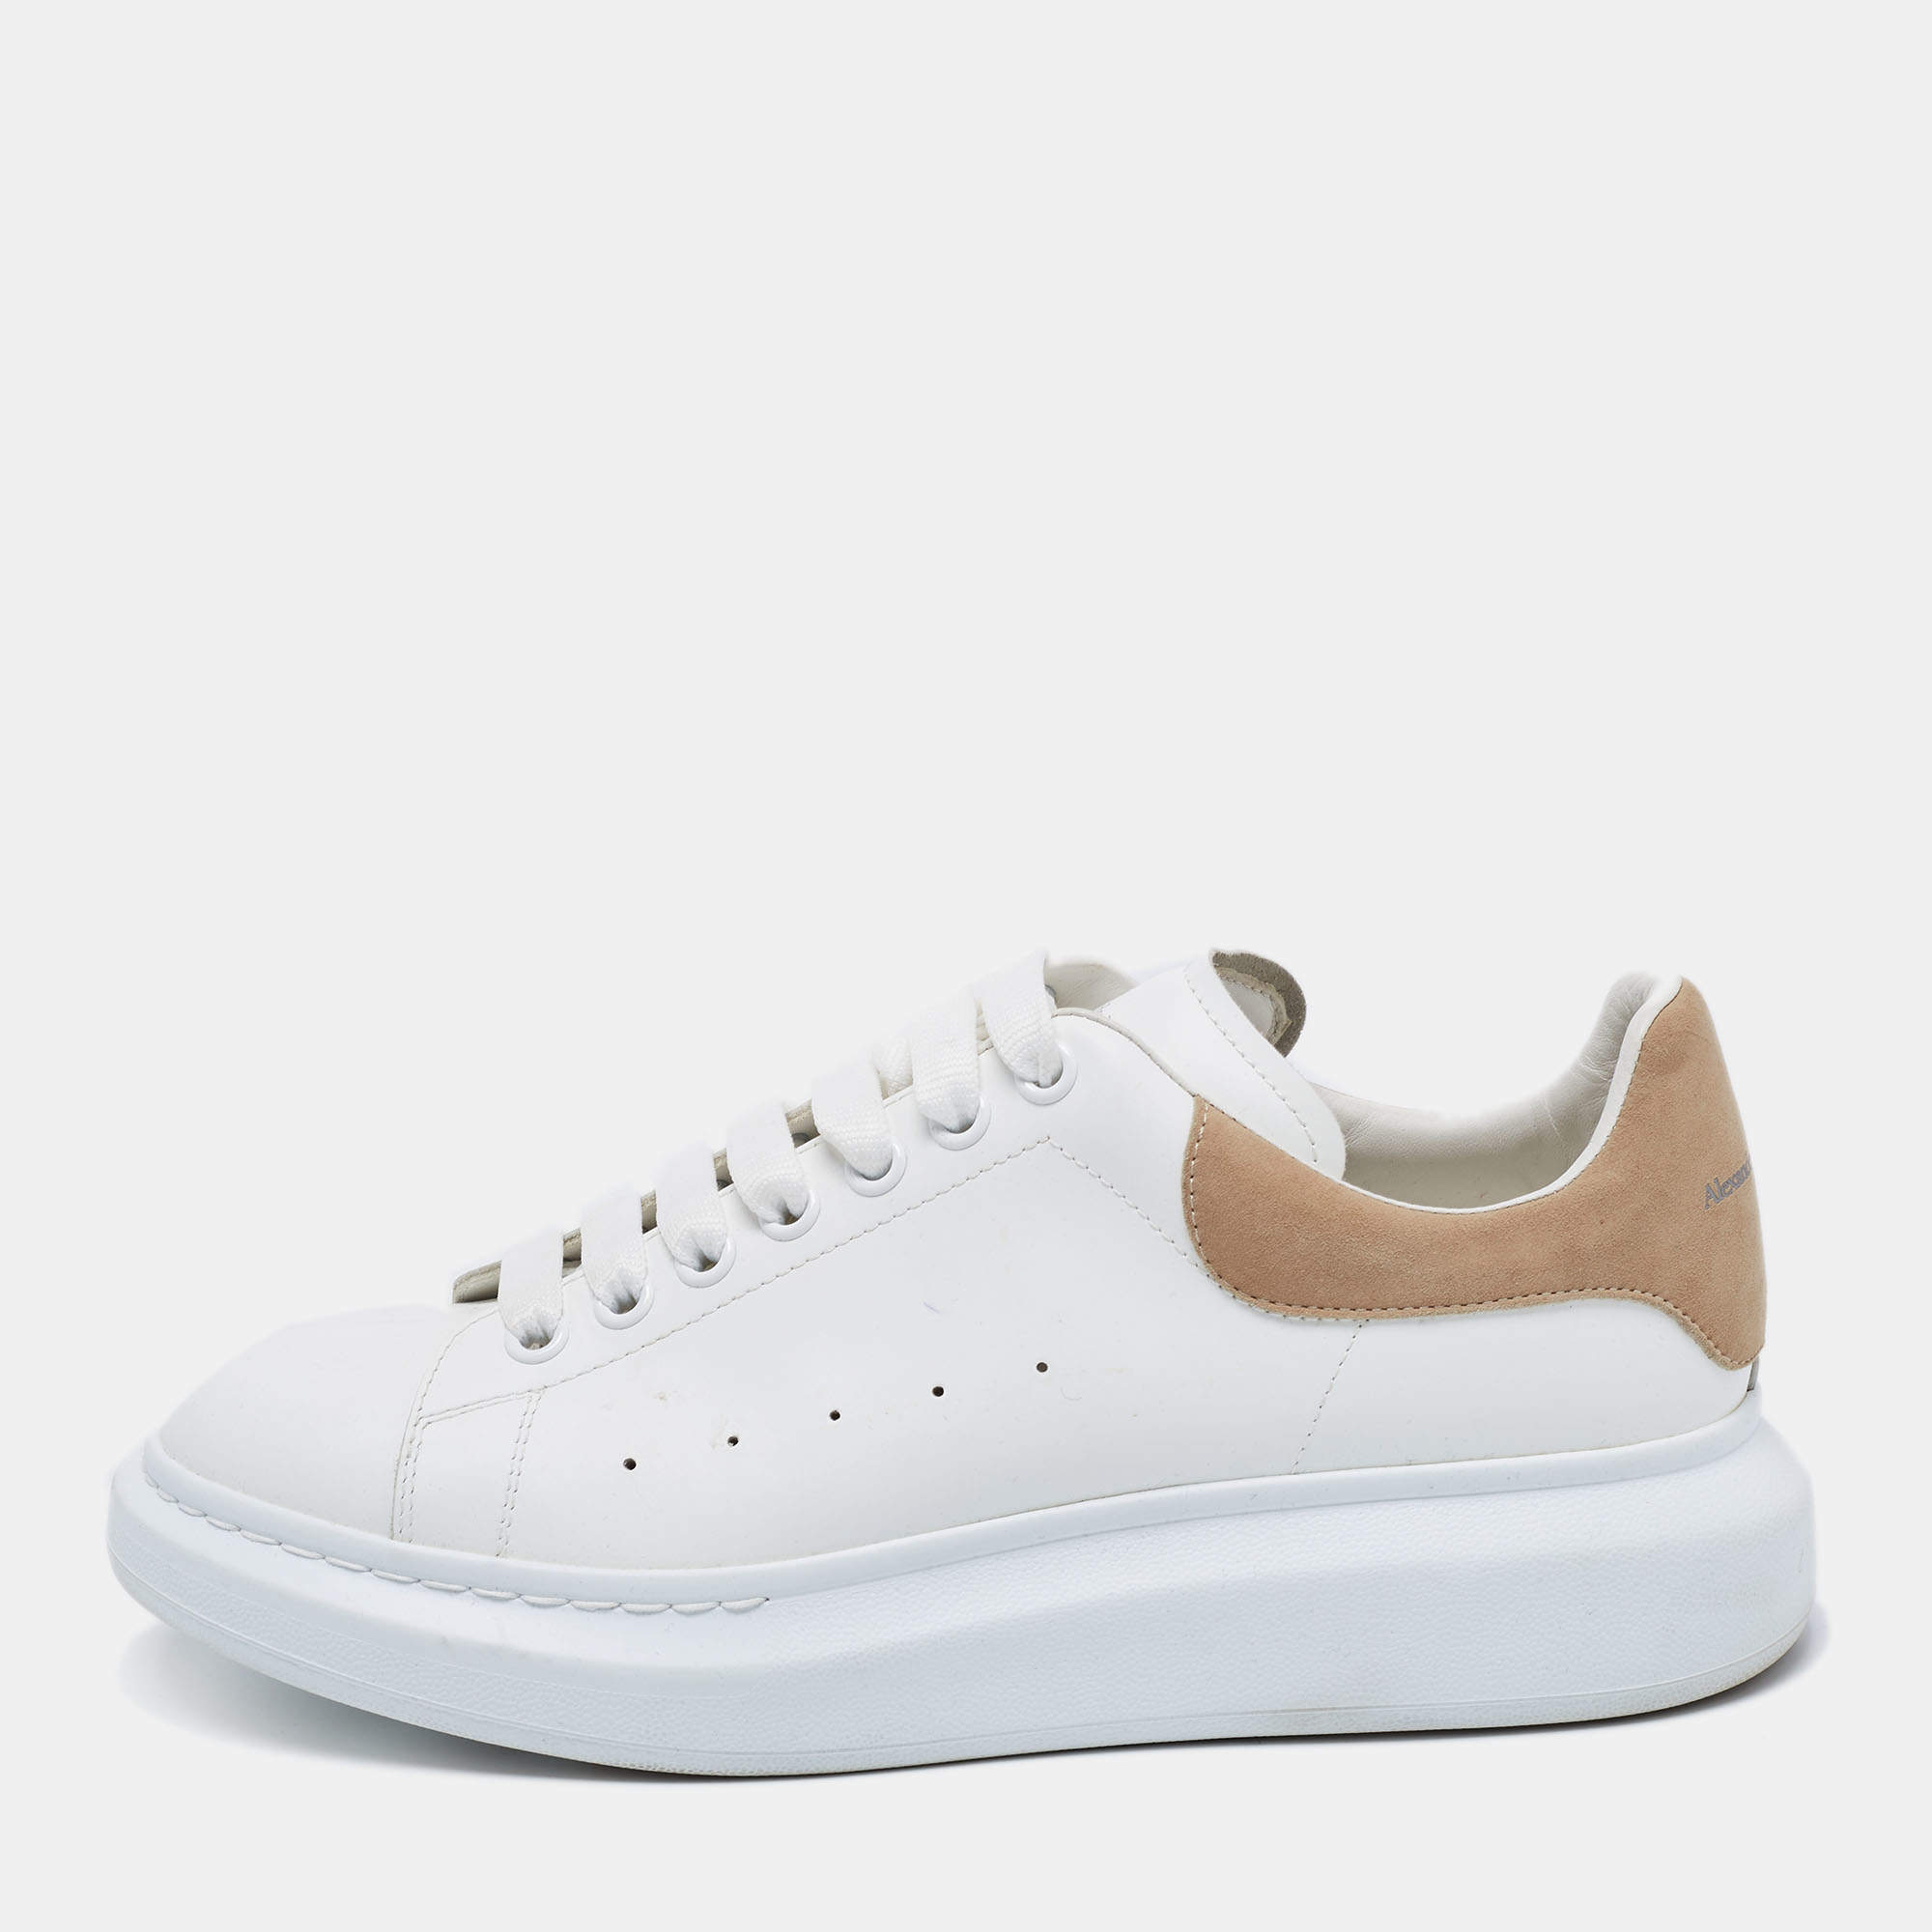 Alexander McQueen White/Beige Leather And Suede Oversized Sneaker Size 43